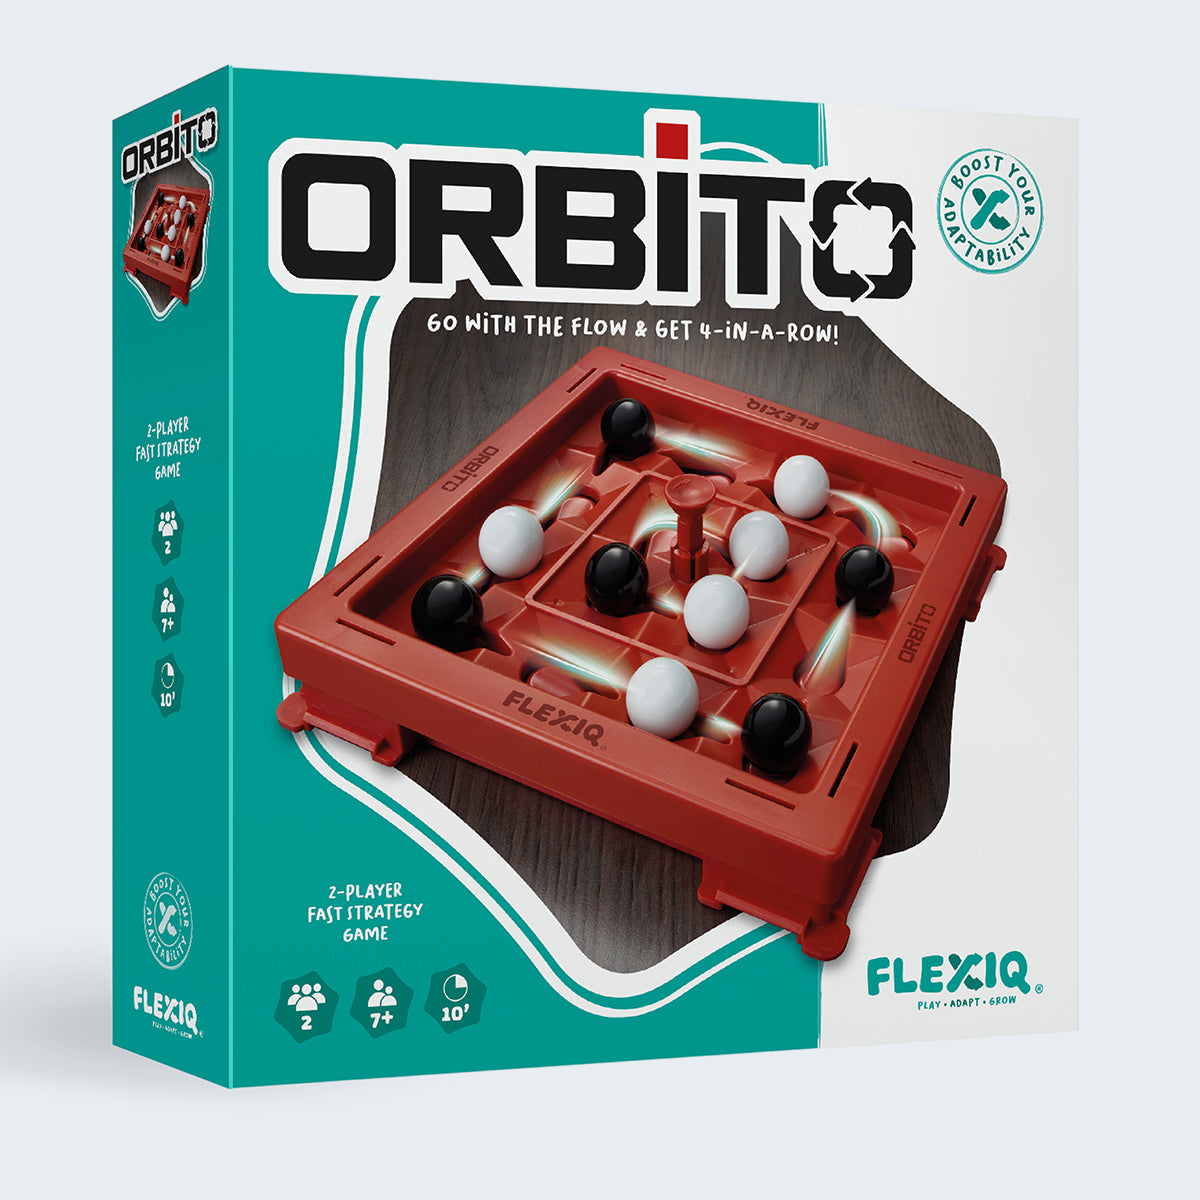 Orbito - The Strategy Game for Kids & Families